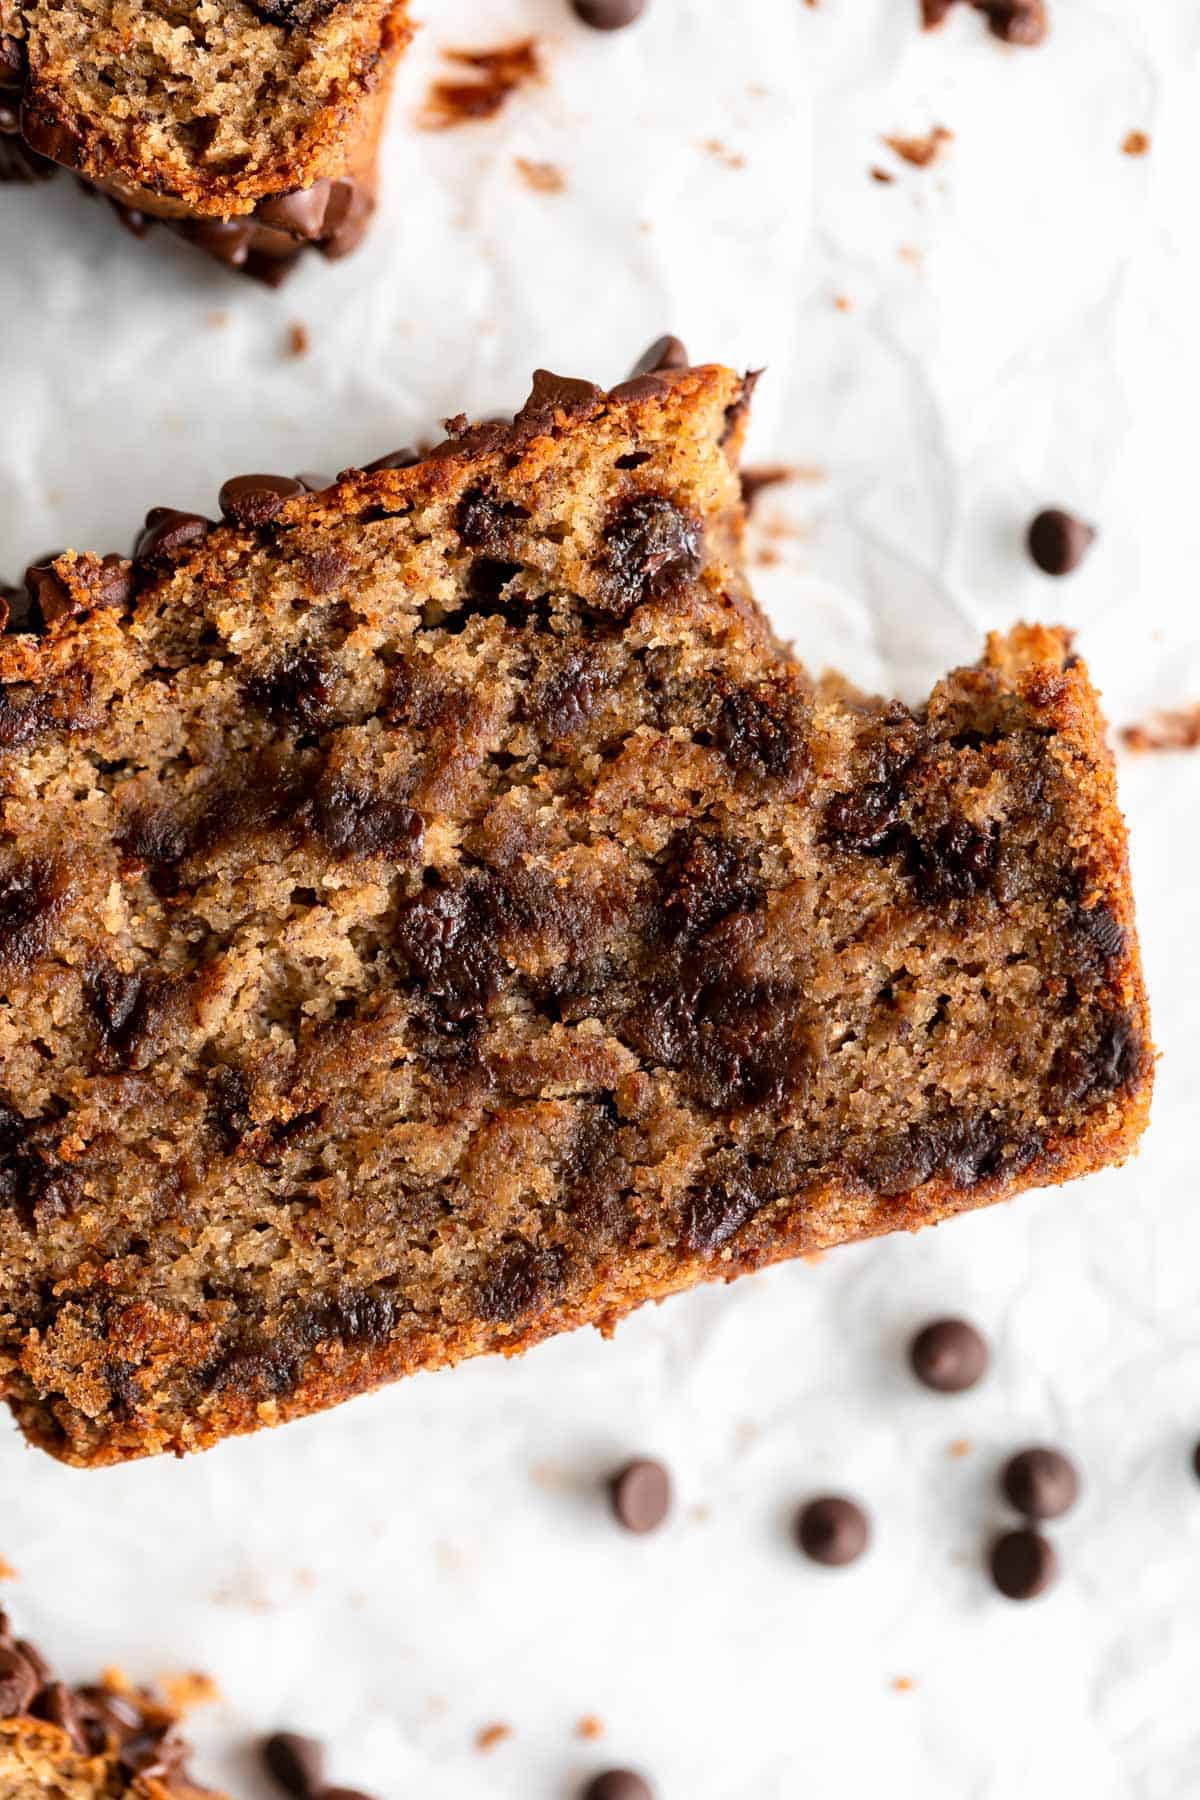 banana bread sliced with chocolate chips